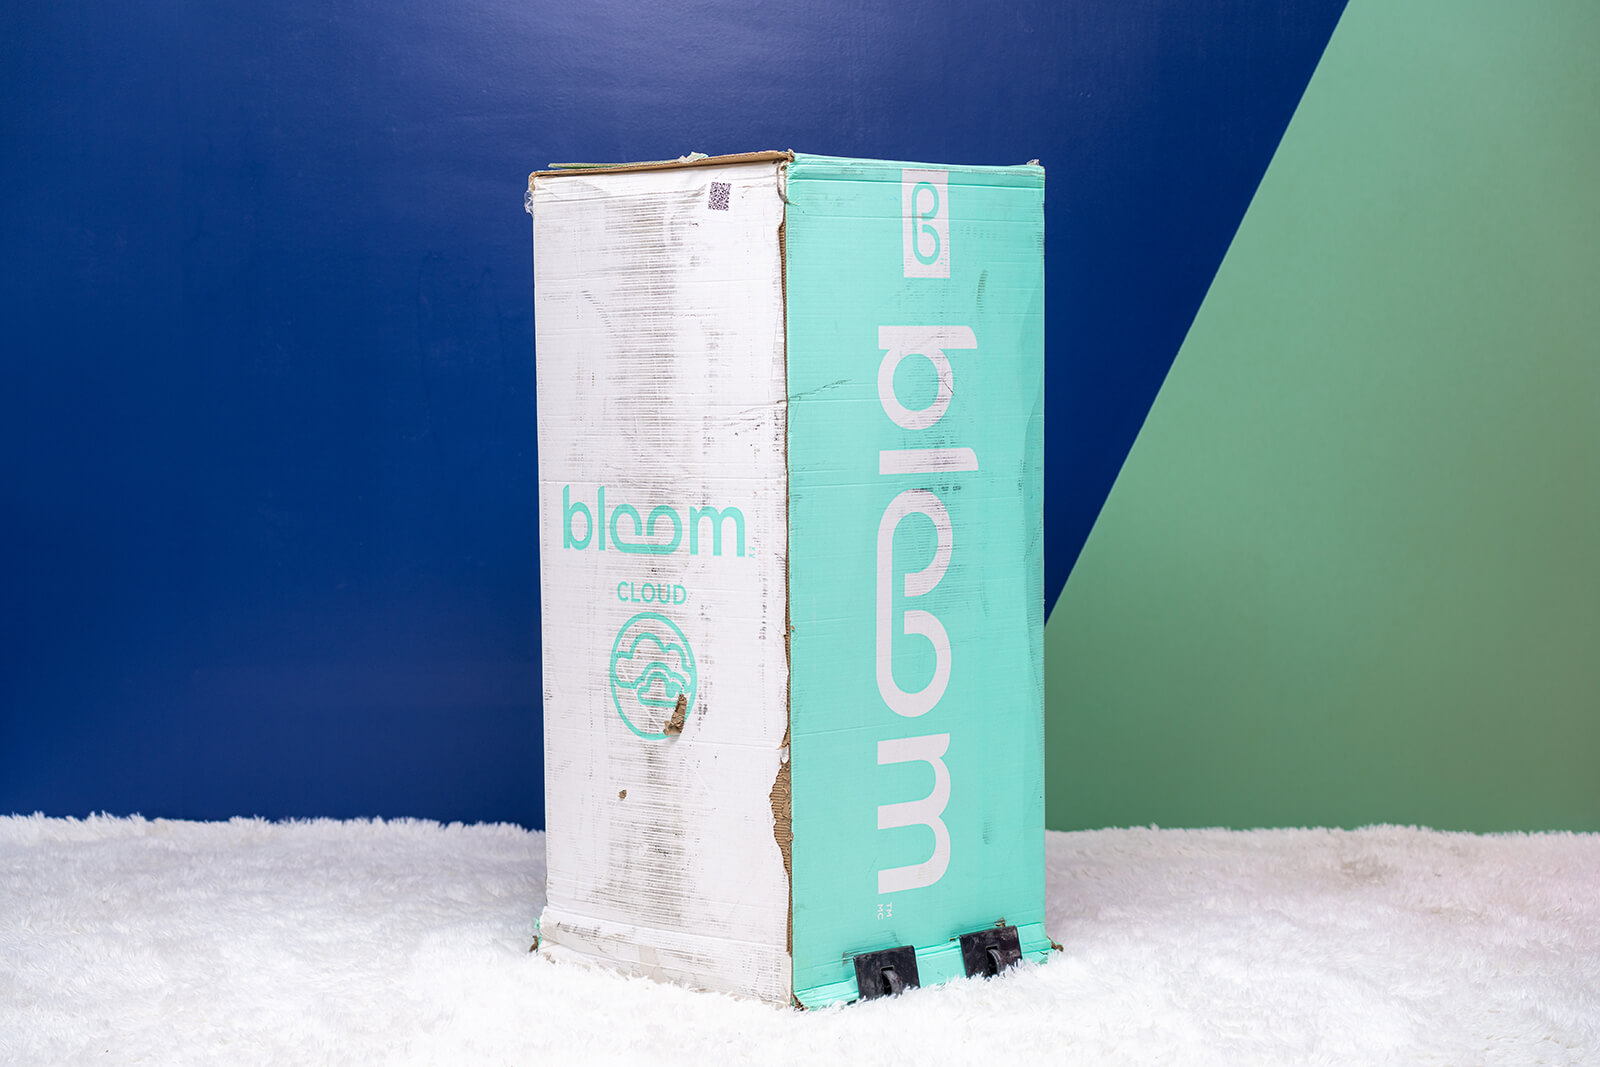 Photo of the Bloom Cloud box on the floor in a bedroom taken from a front angle.